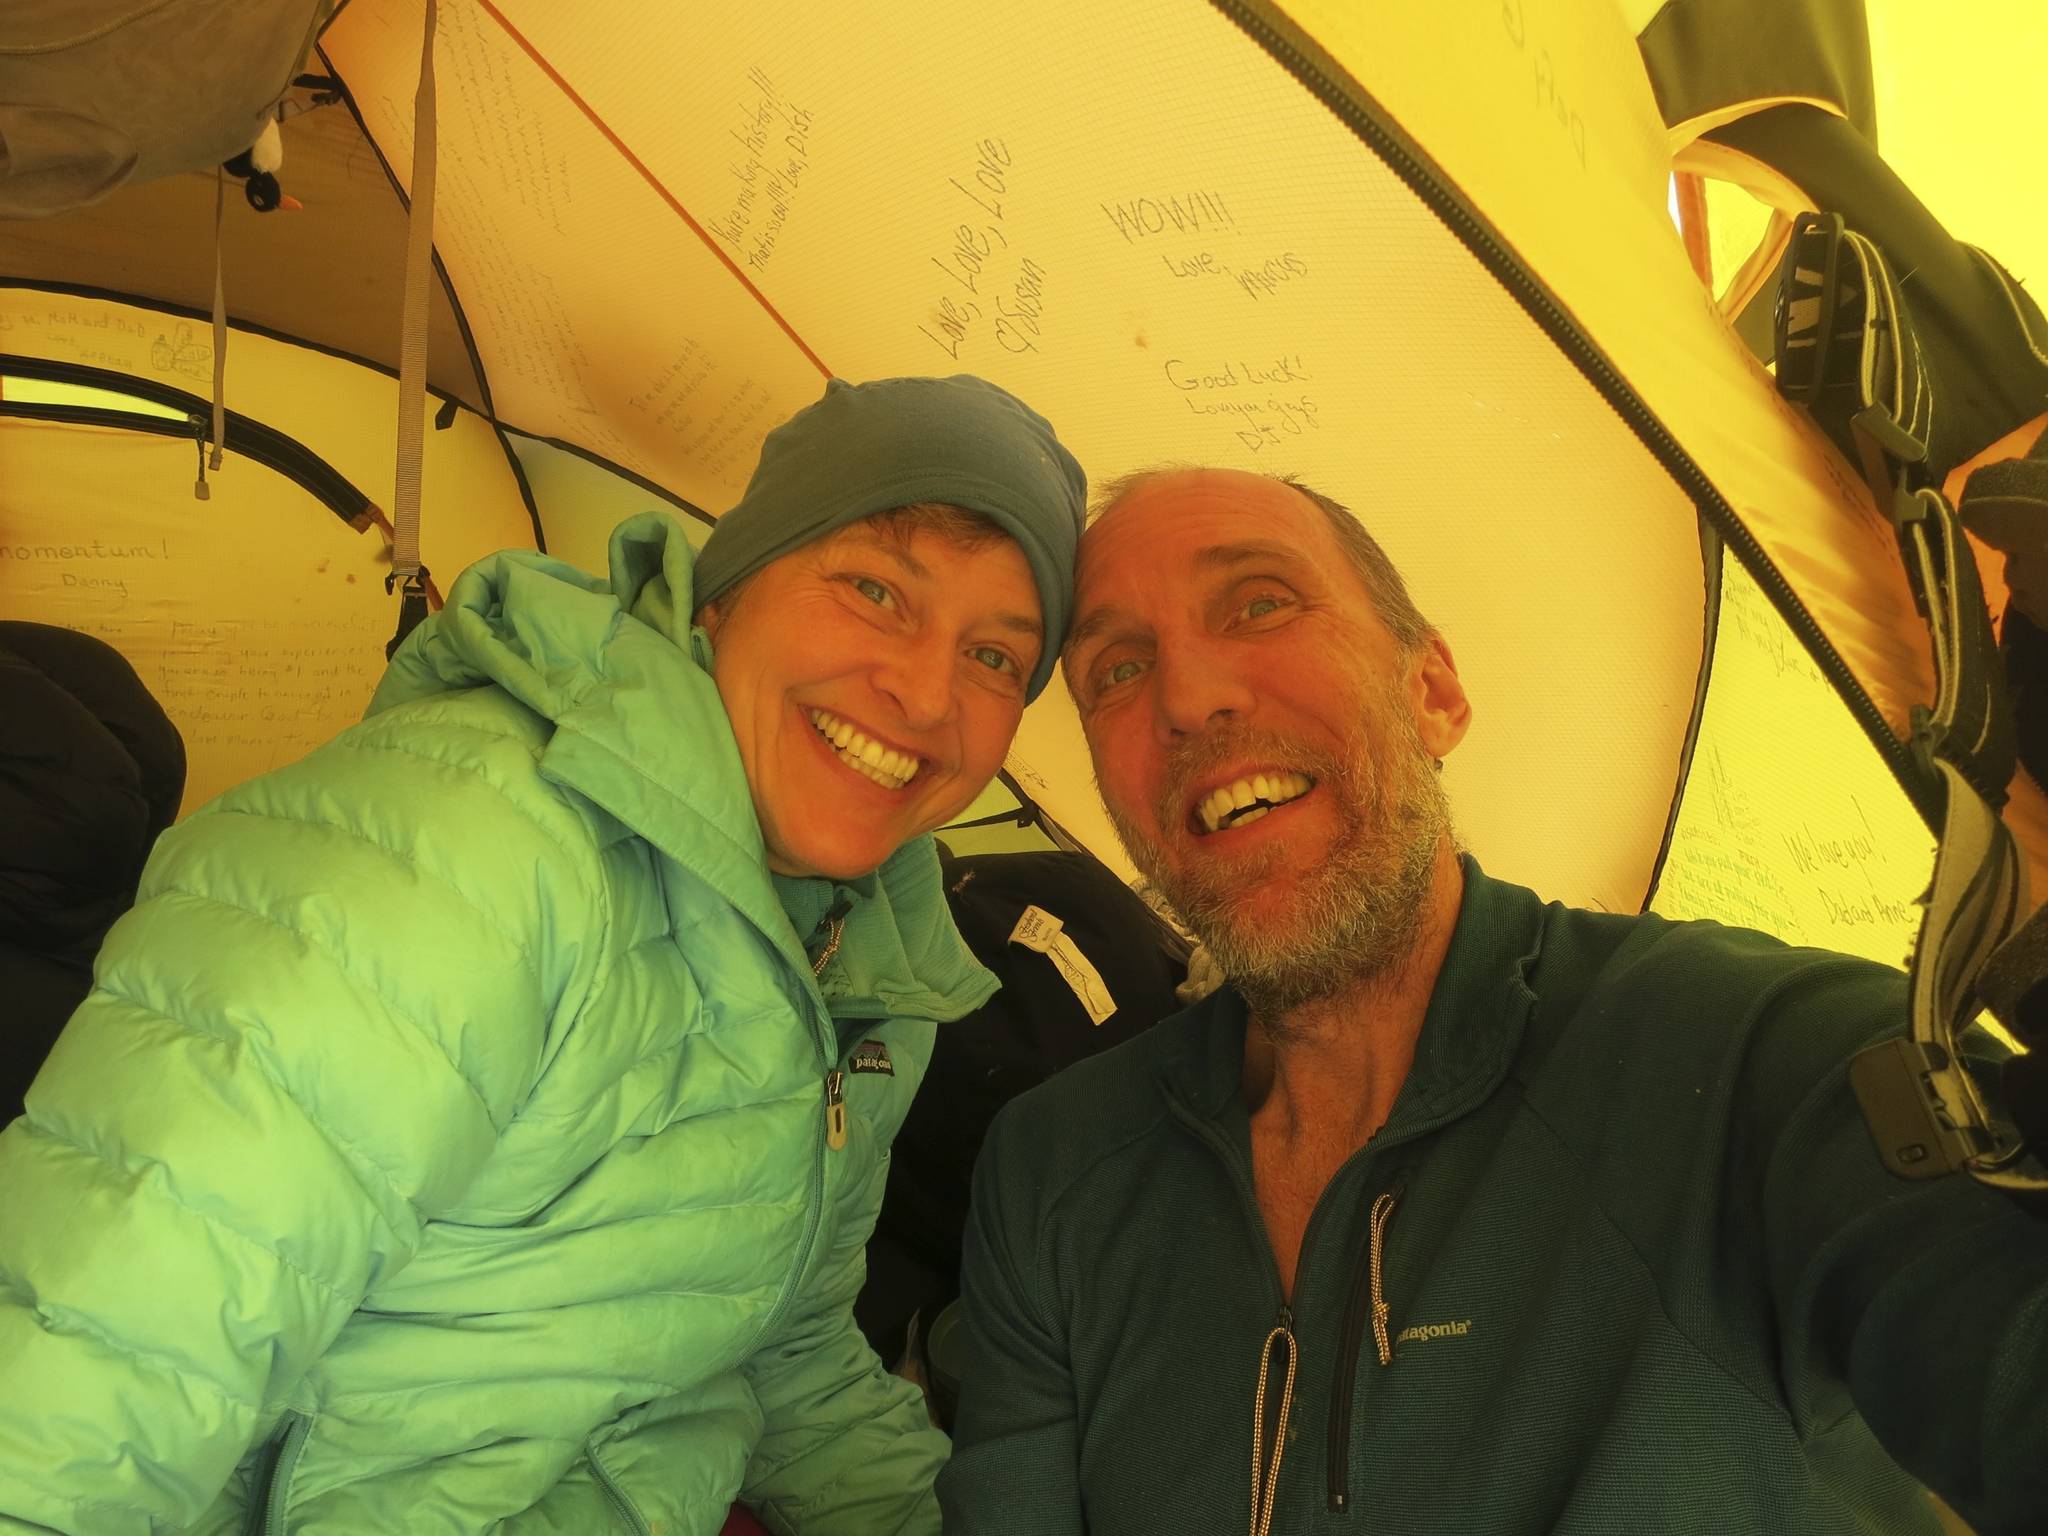 Chris and Marty Fagan in their tent as they traveled across Antarctica in 2014. Contributed by Chris Fagan